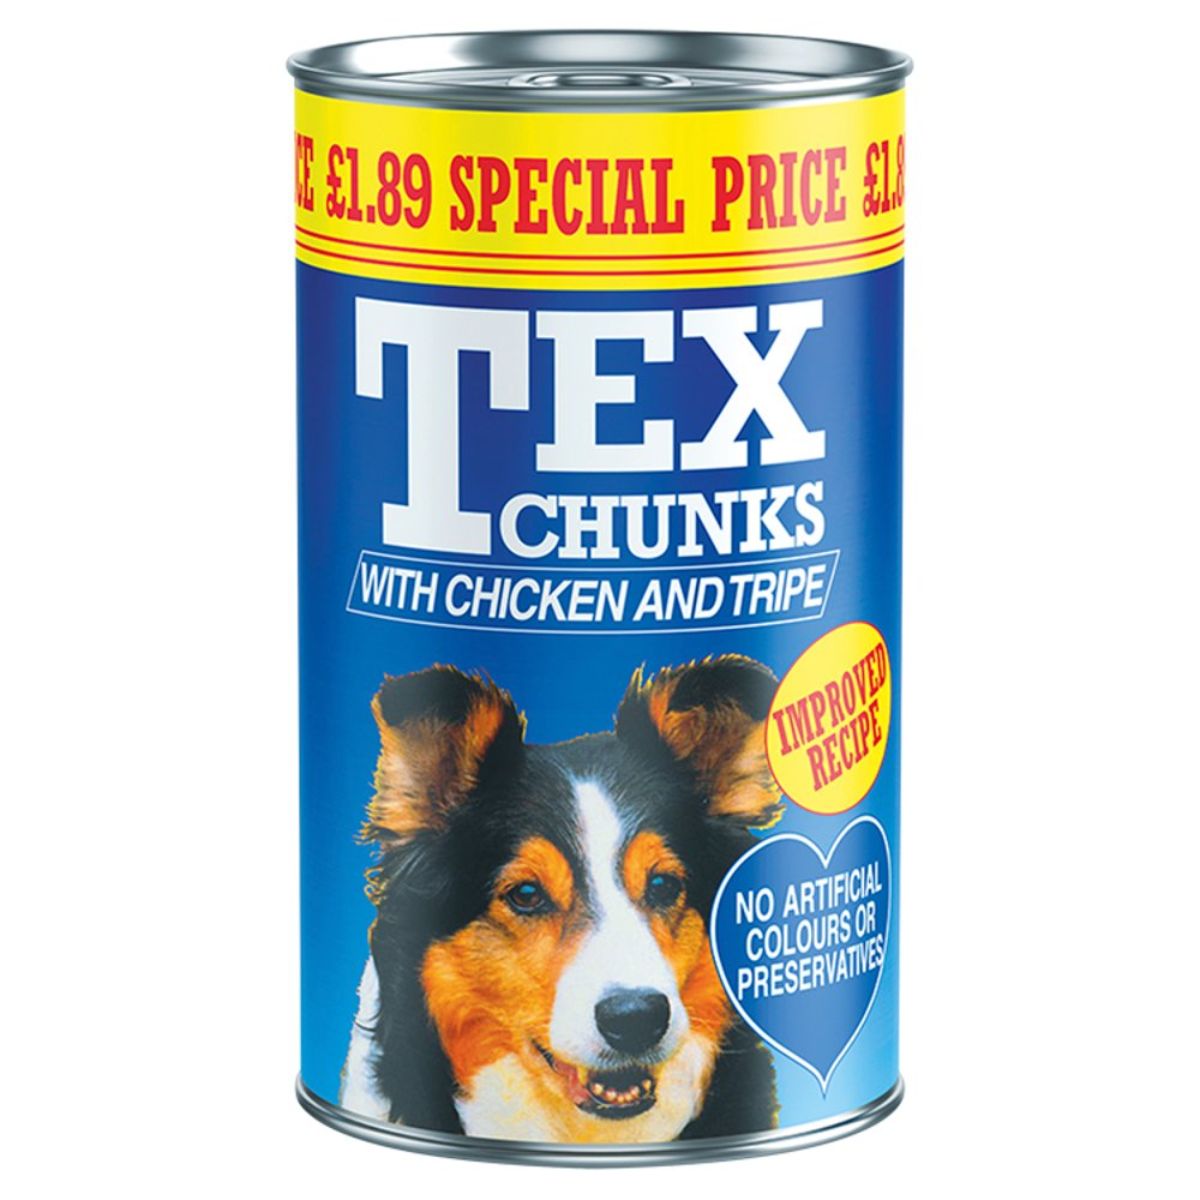 A can of Tex - Chunks with Chicken and Tribe - 1.2kg with chicken and peas.